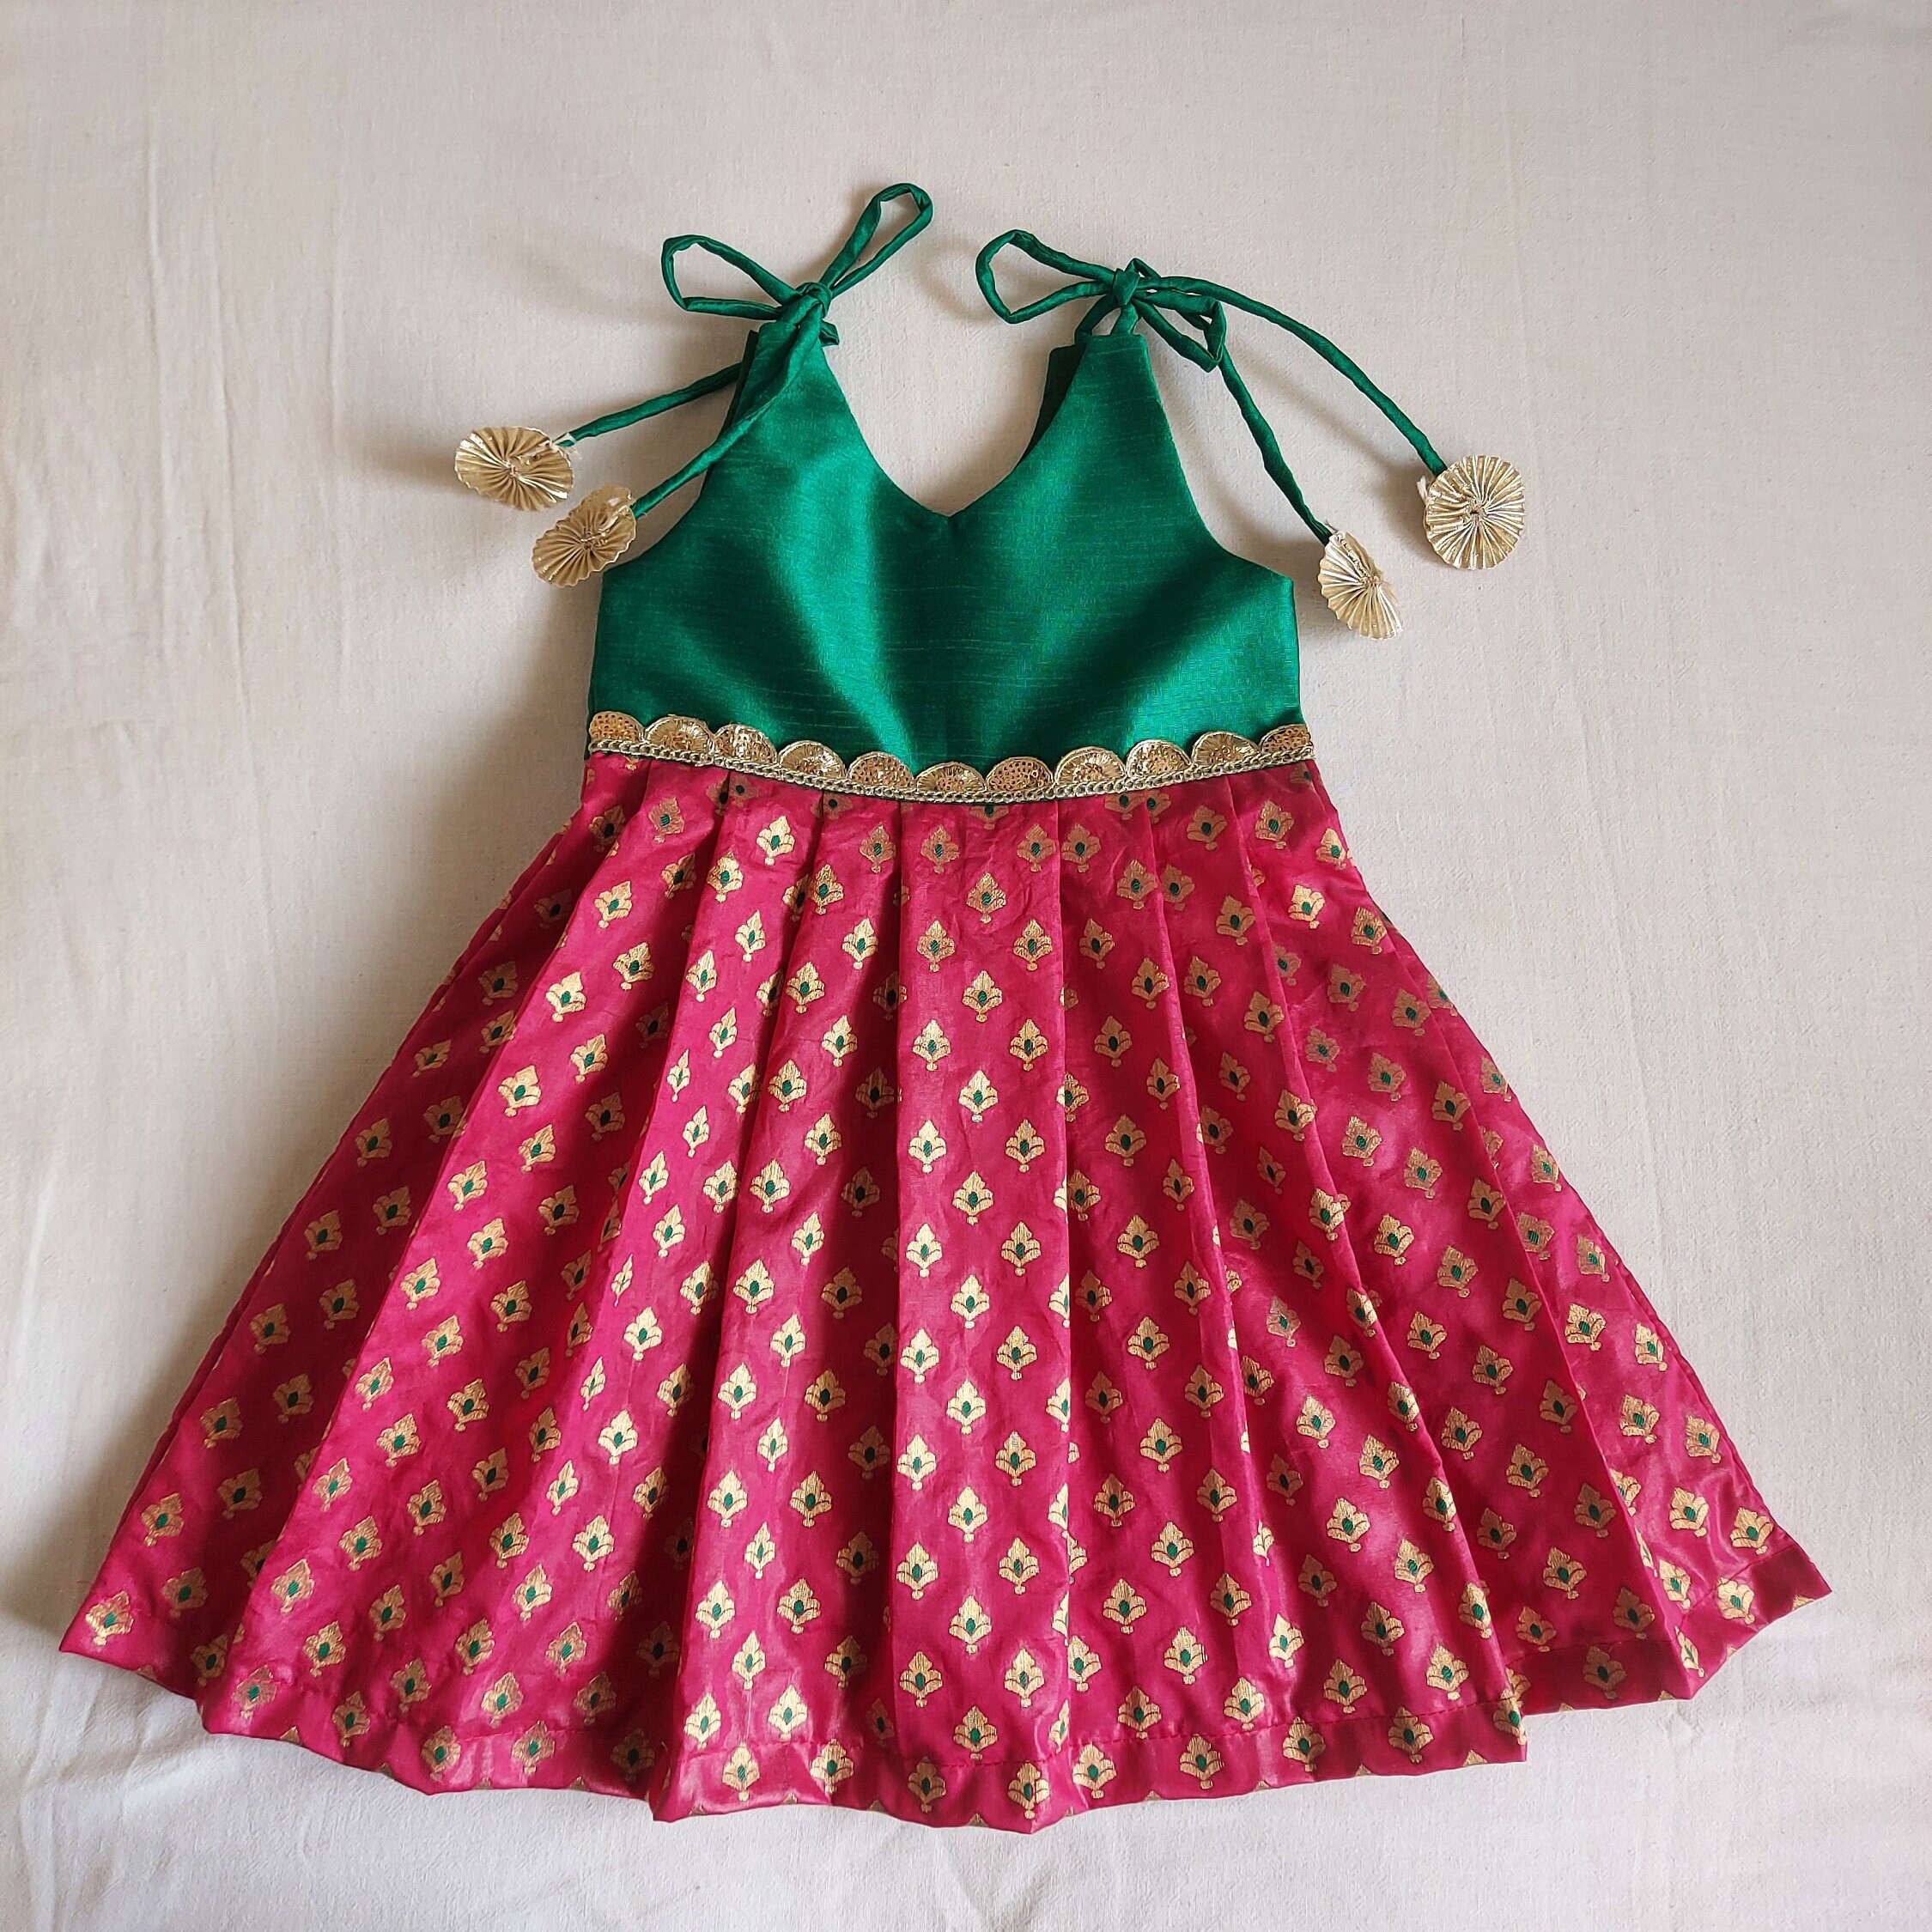 Top Stunning And Amazing Cotton Casual Wear Baby Frocks Designs - YouTube |  Dresses kids girl, Baby frocks designs, Girls frock design